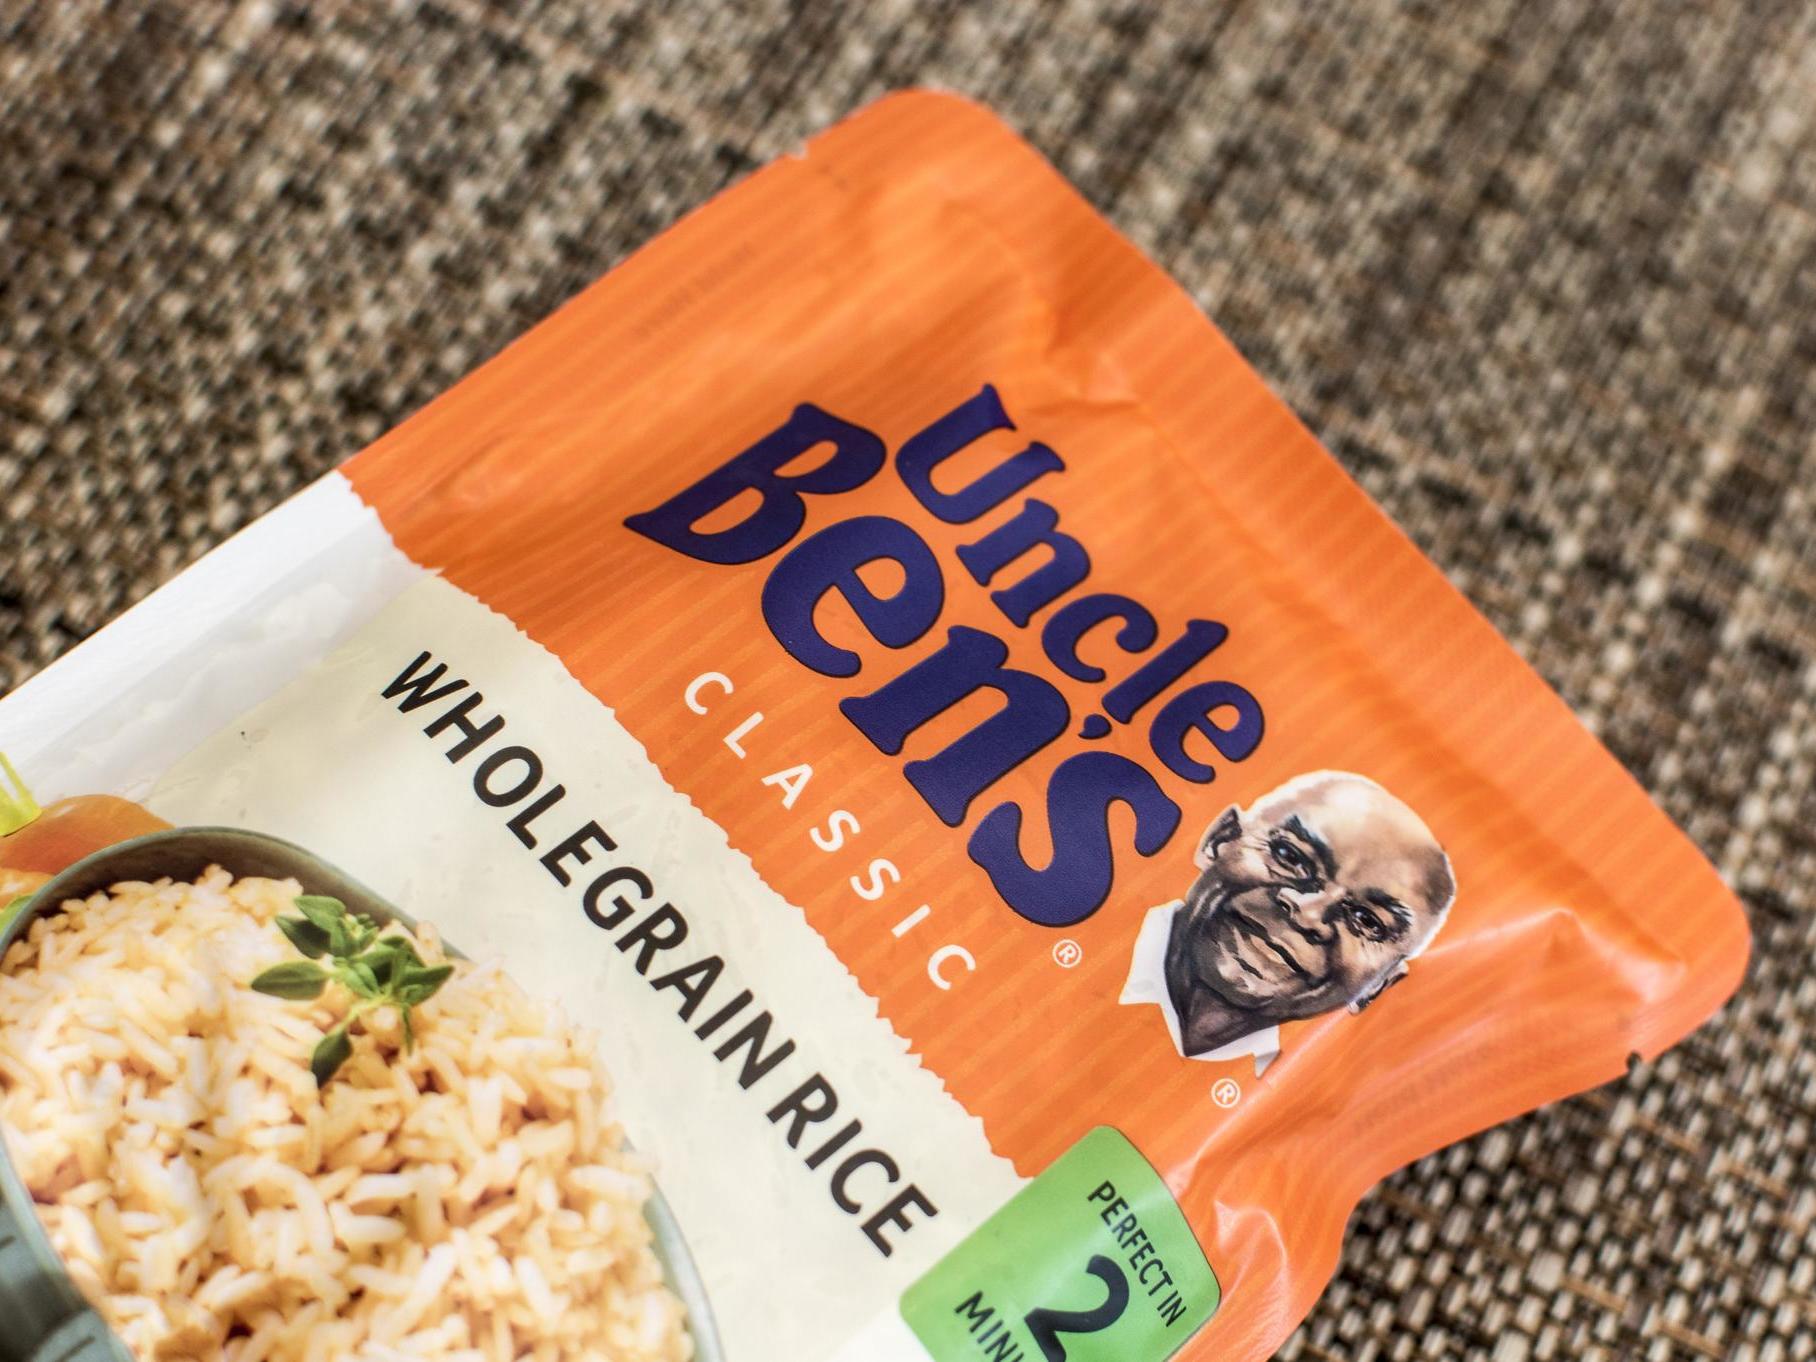 Uncle Bens’ rice vows to ‘evolve’ brand to address ‘racial bias and